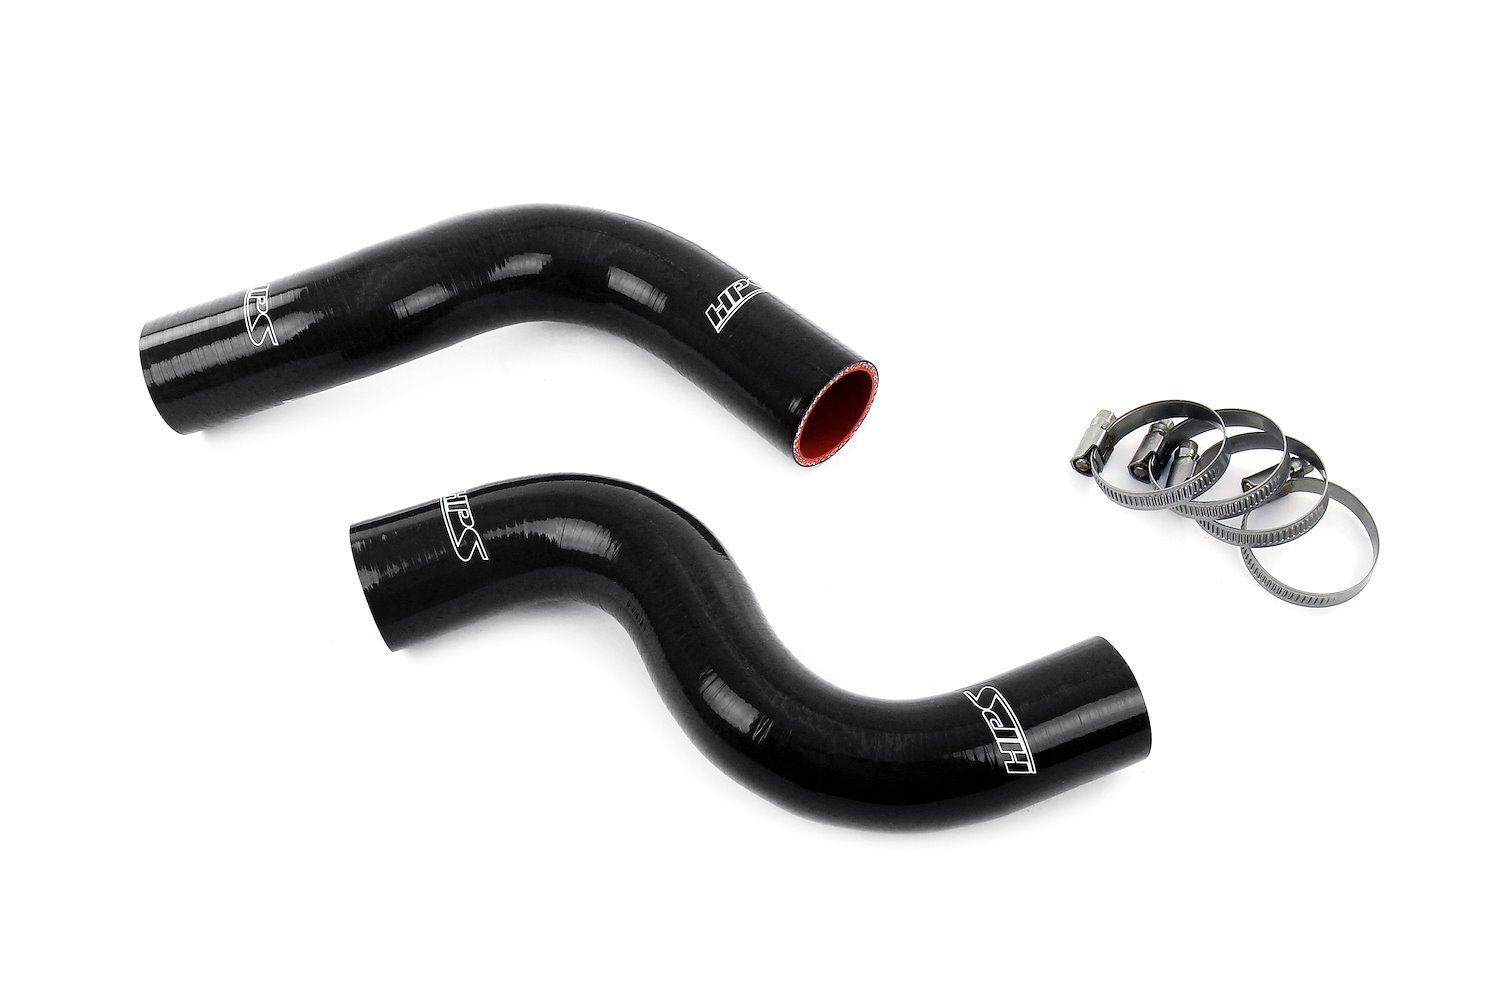 57-2109-BLK Radiator Hose Kit, 3-Ply Reinforced Silicone, Replaces Rubber Radiator Coolant Hoses